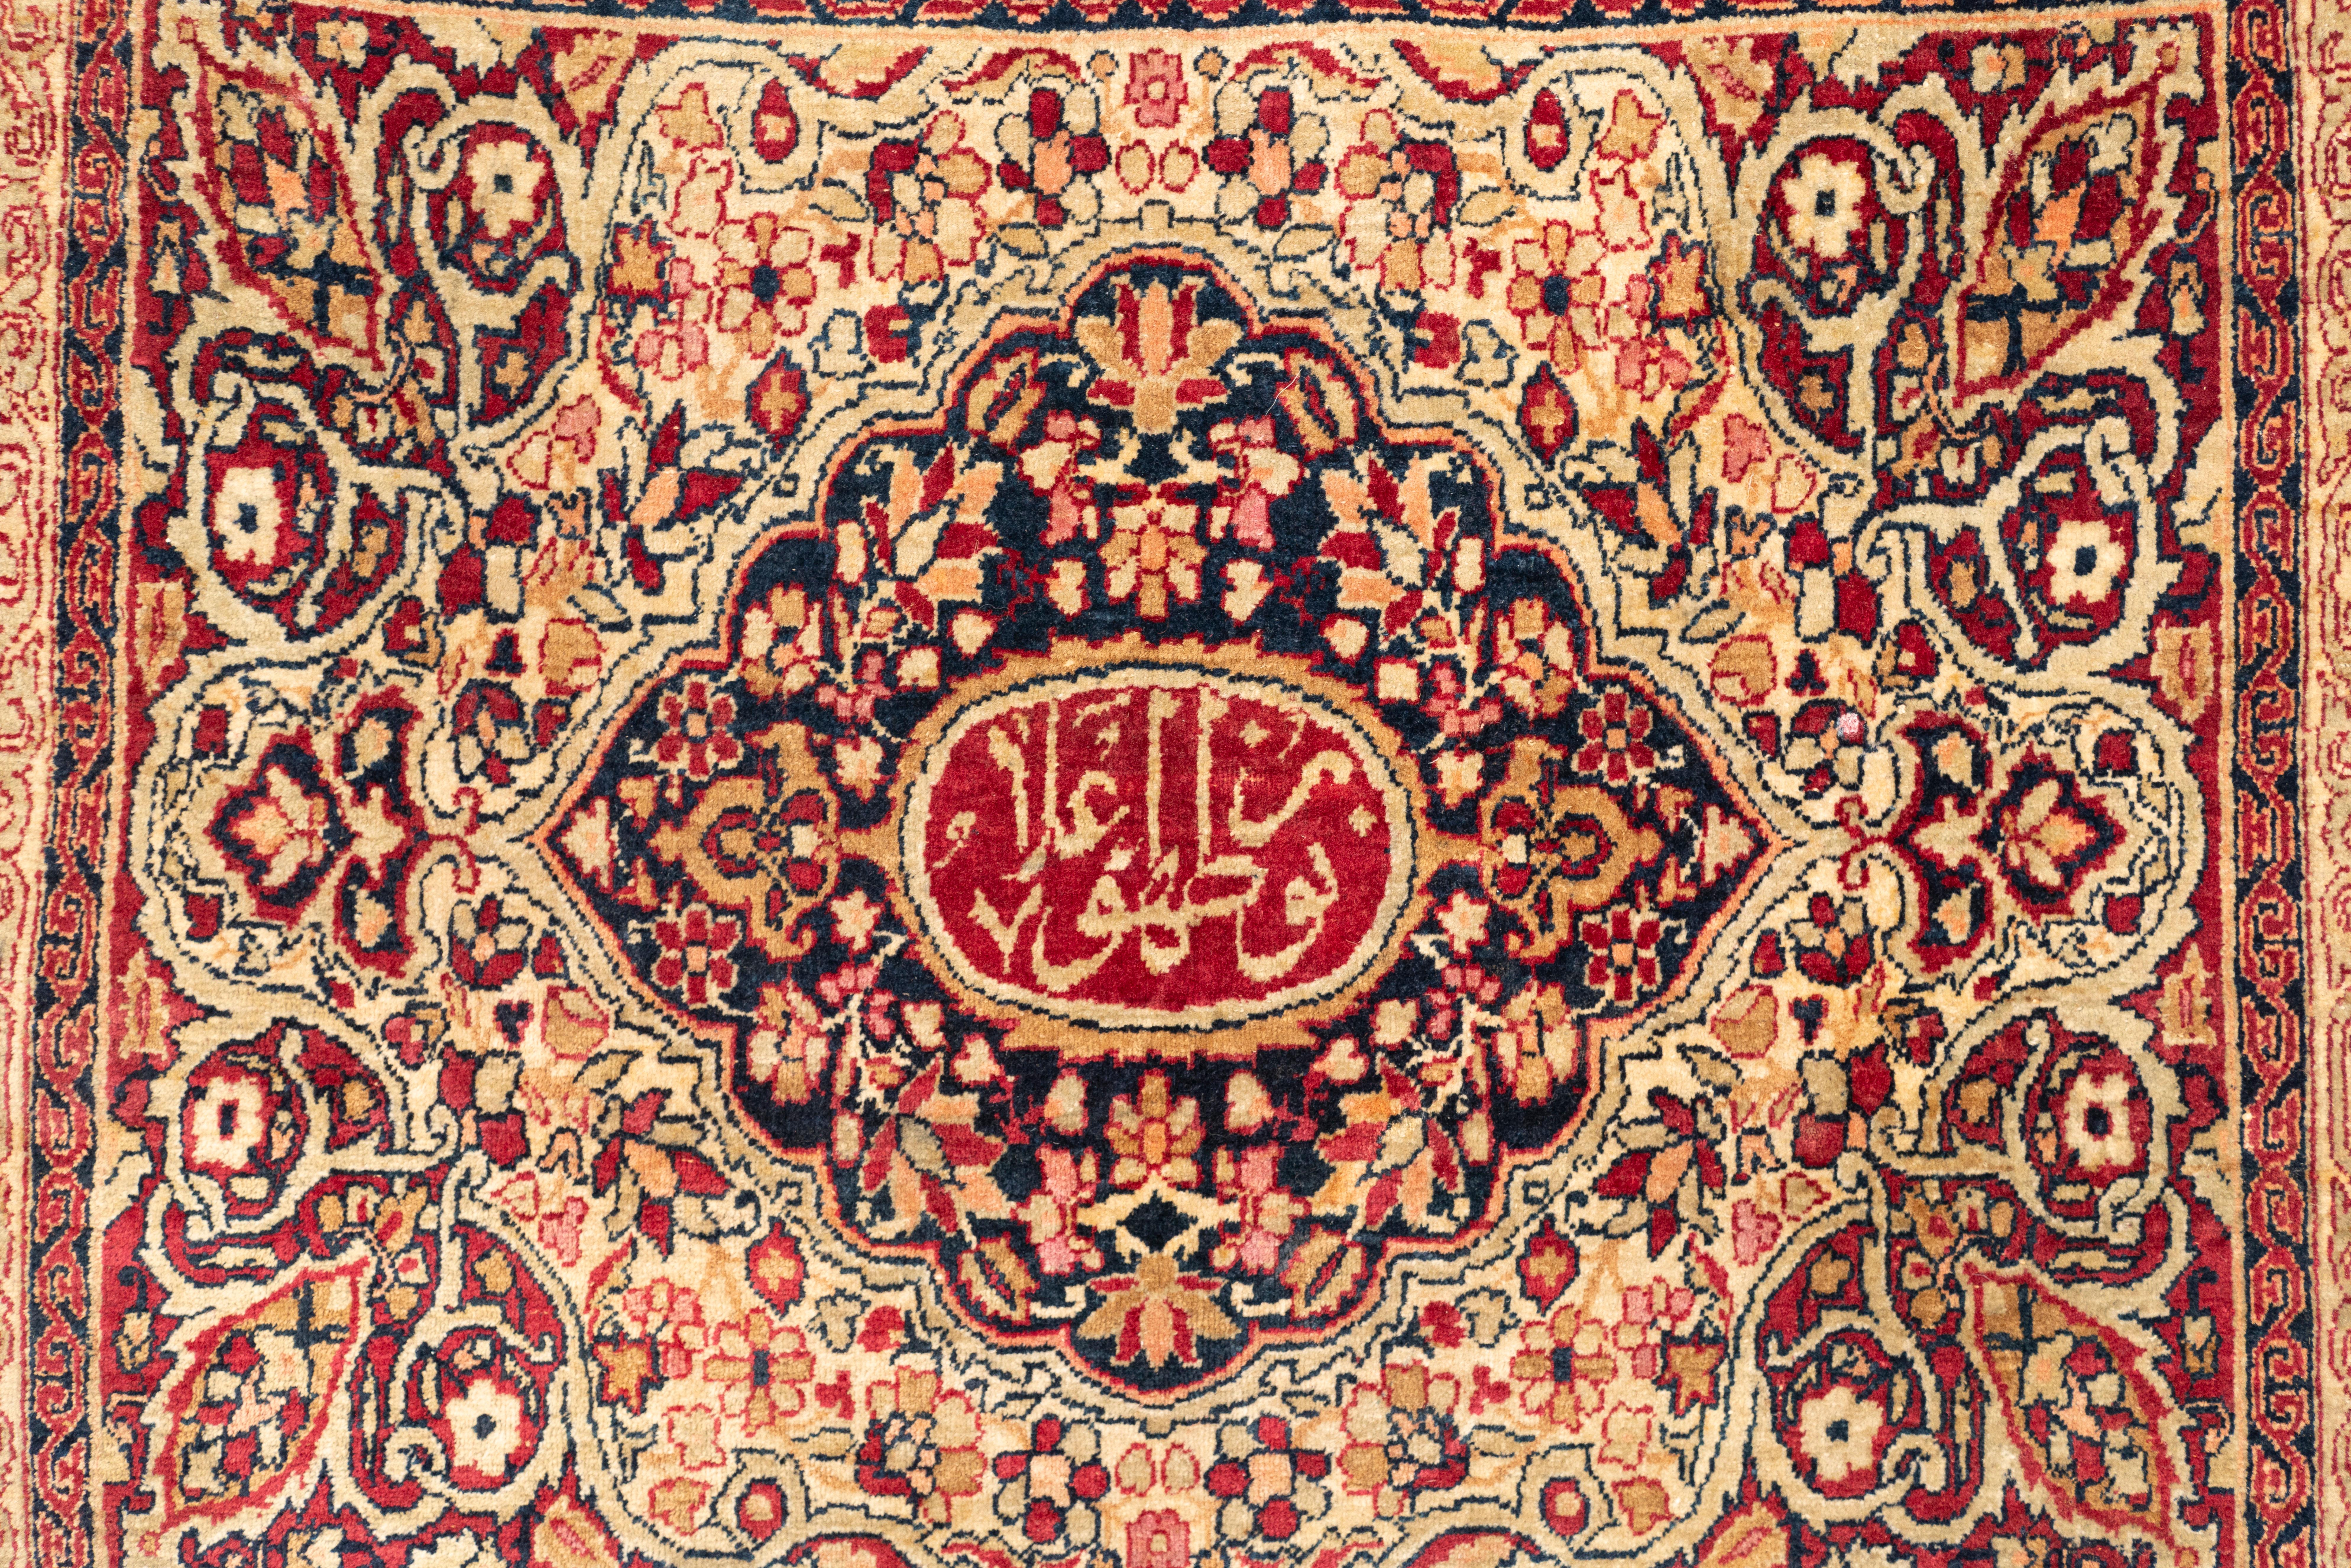  Kerman, one of the 4 cities in Persia which produced exquisite court carpets is the home of this very fine, and unusual piece – rarely do you find a piece of these dimensions from Kerman. Its fine details are evident and it is in excellent